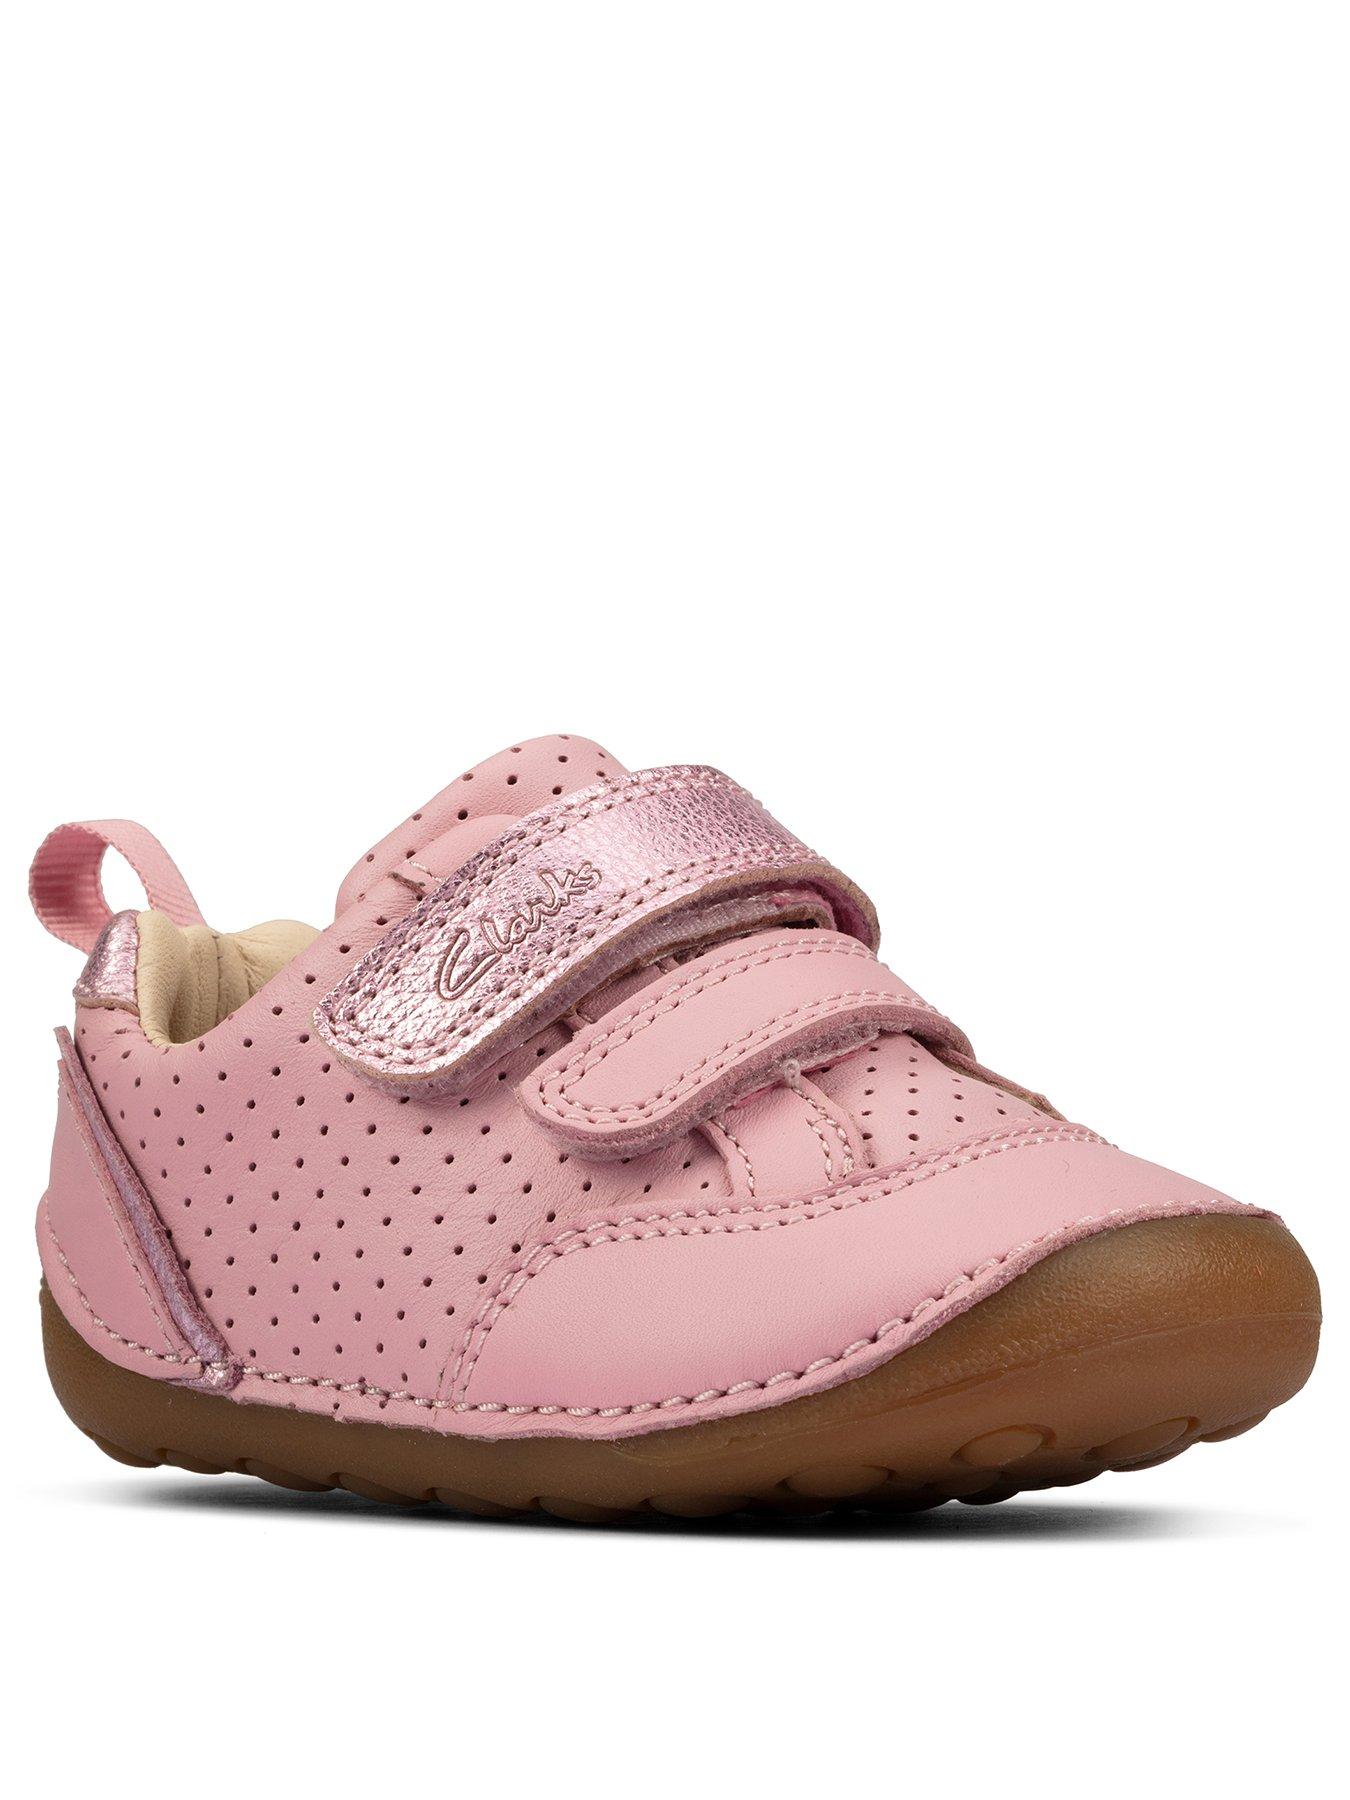 Shoes & boots First Tiny Sky Shoe - Light Pink